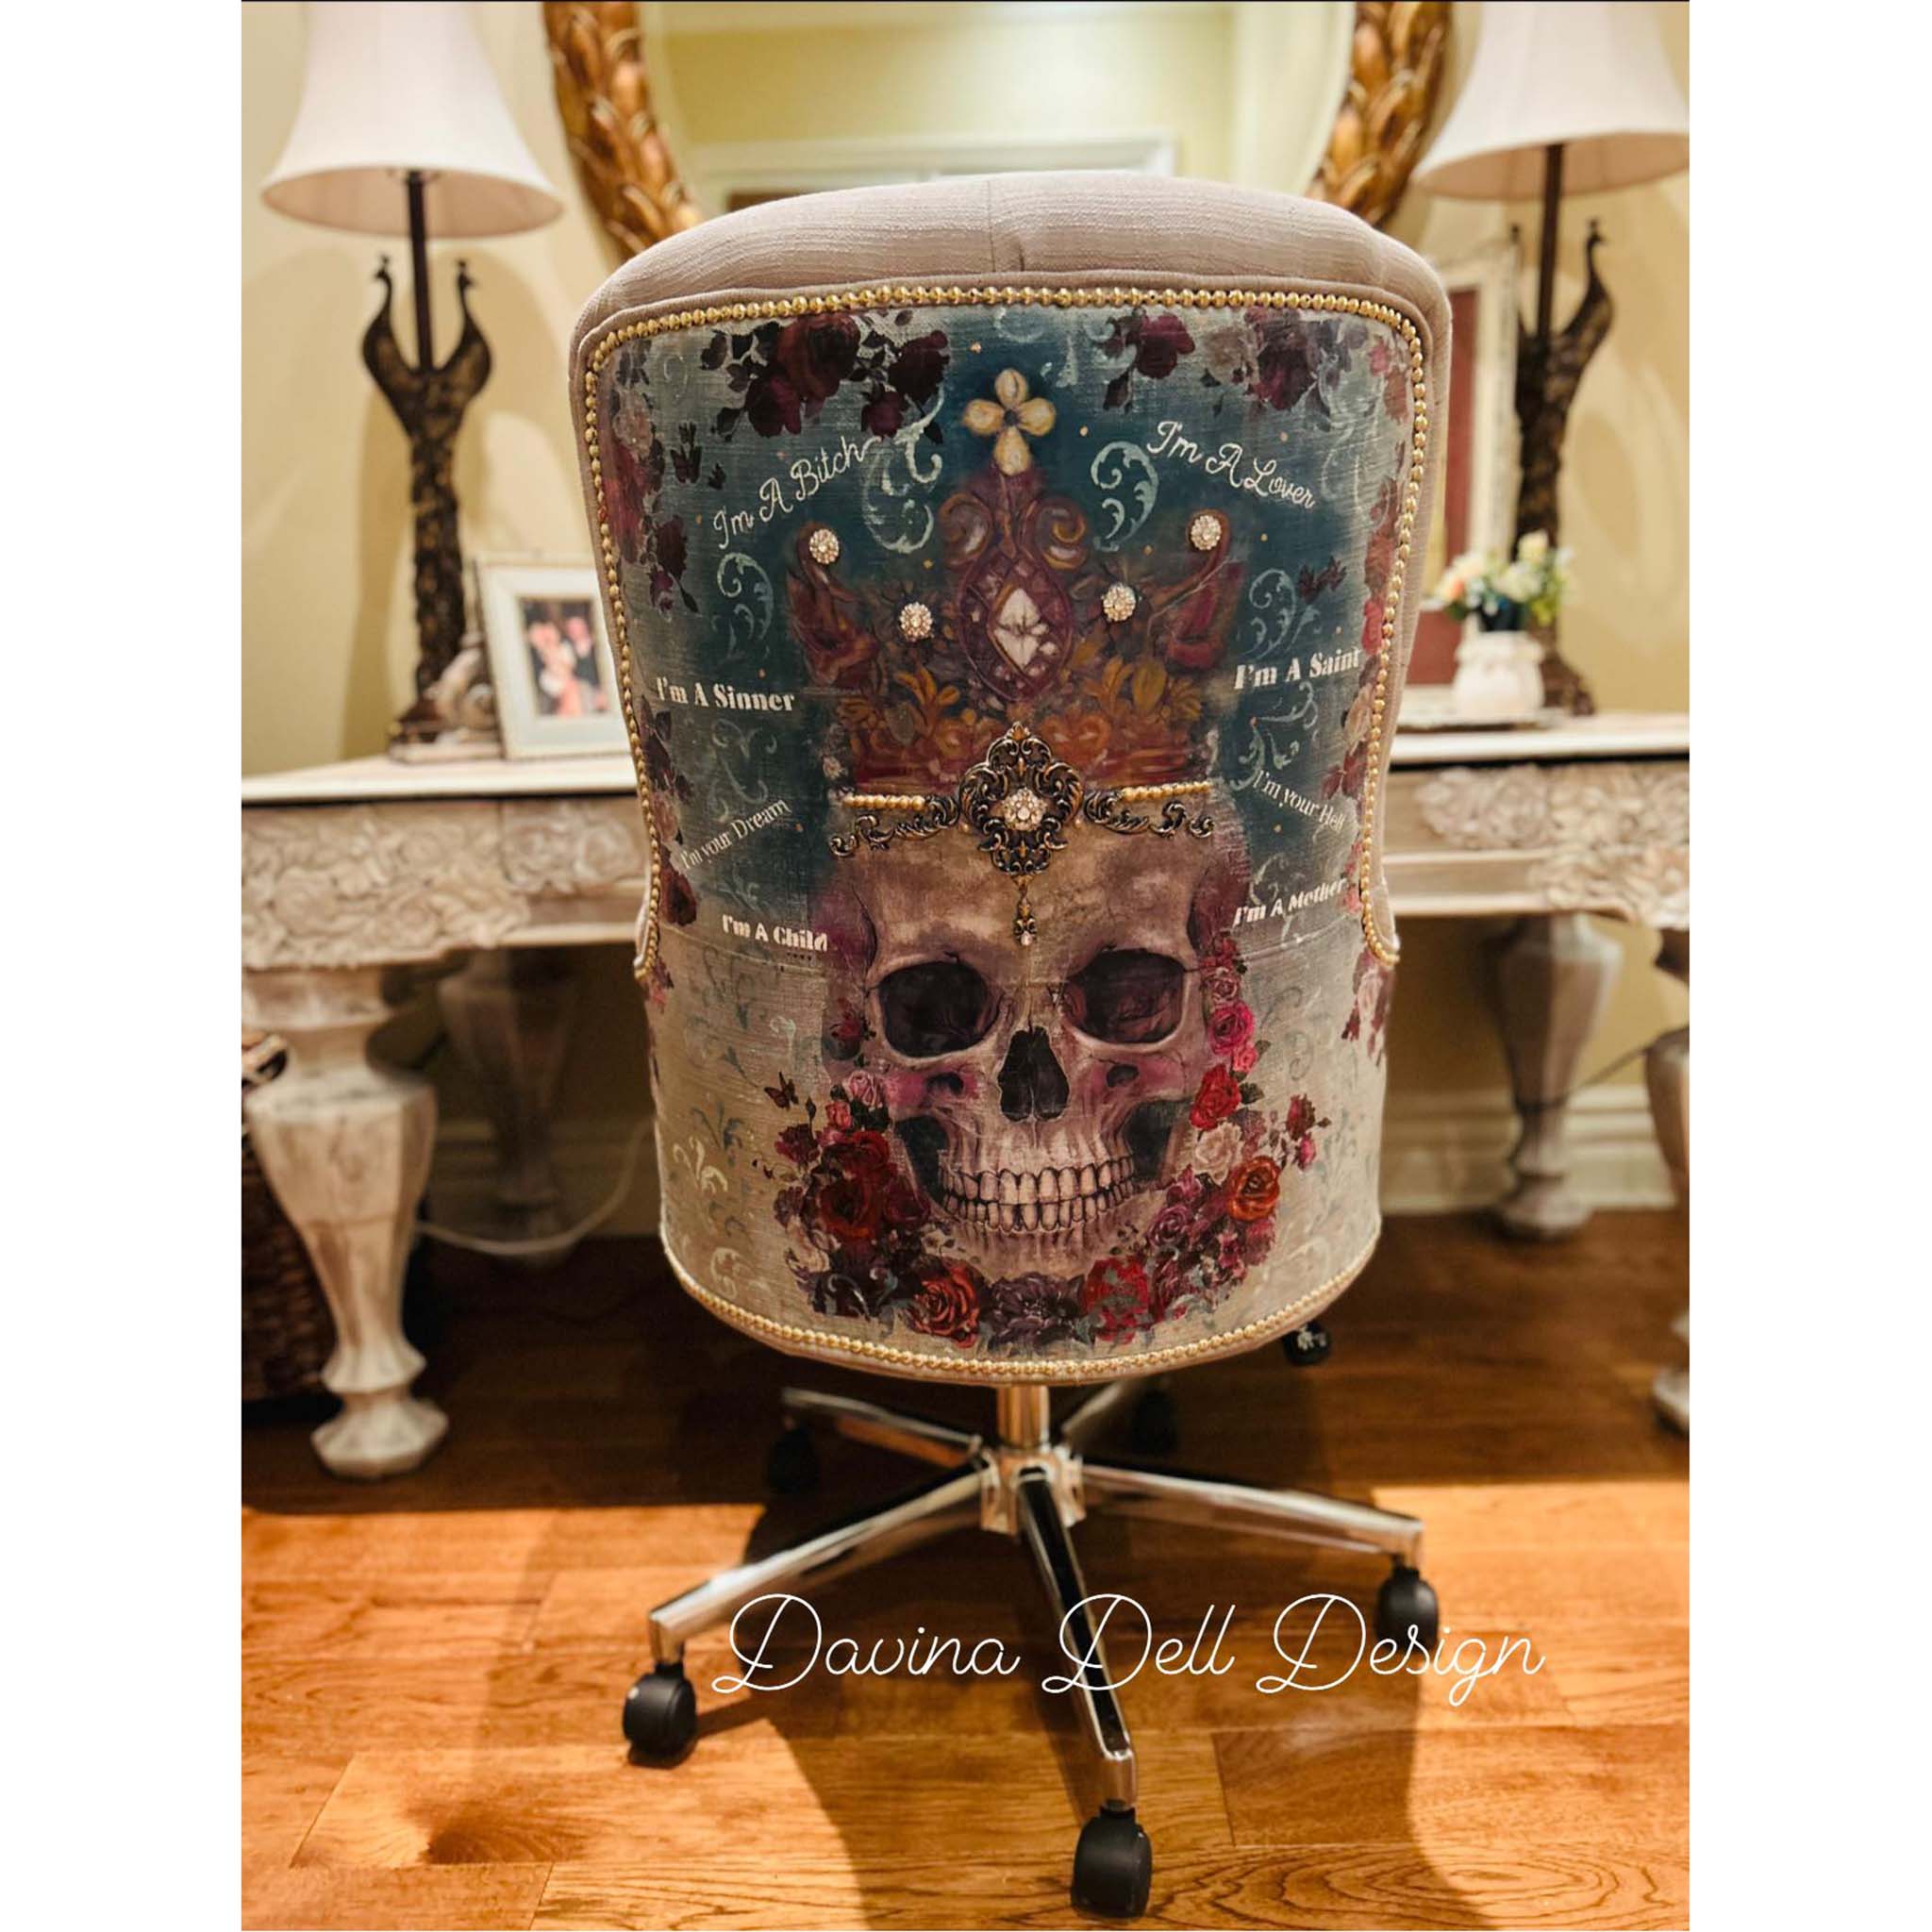 A vintage cushioned chair refurbised by Davina Dell Design features Whimsykel's Skull Queen tissue paper on the back of the chair.